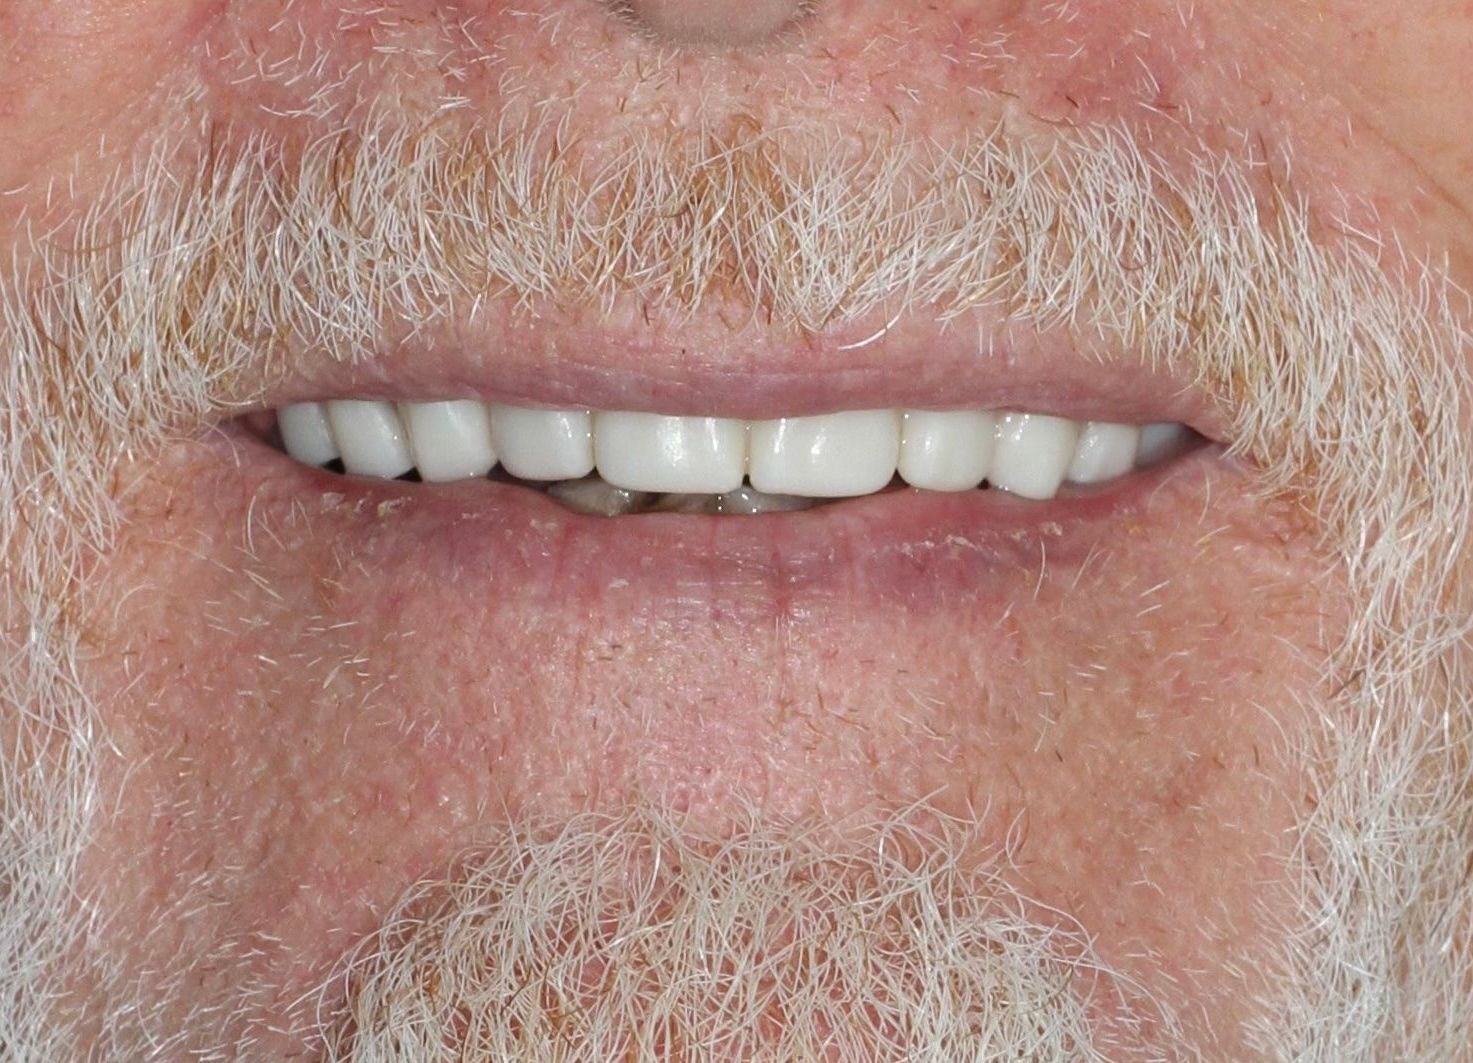 A man with a beard and white teeth is smiling.